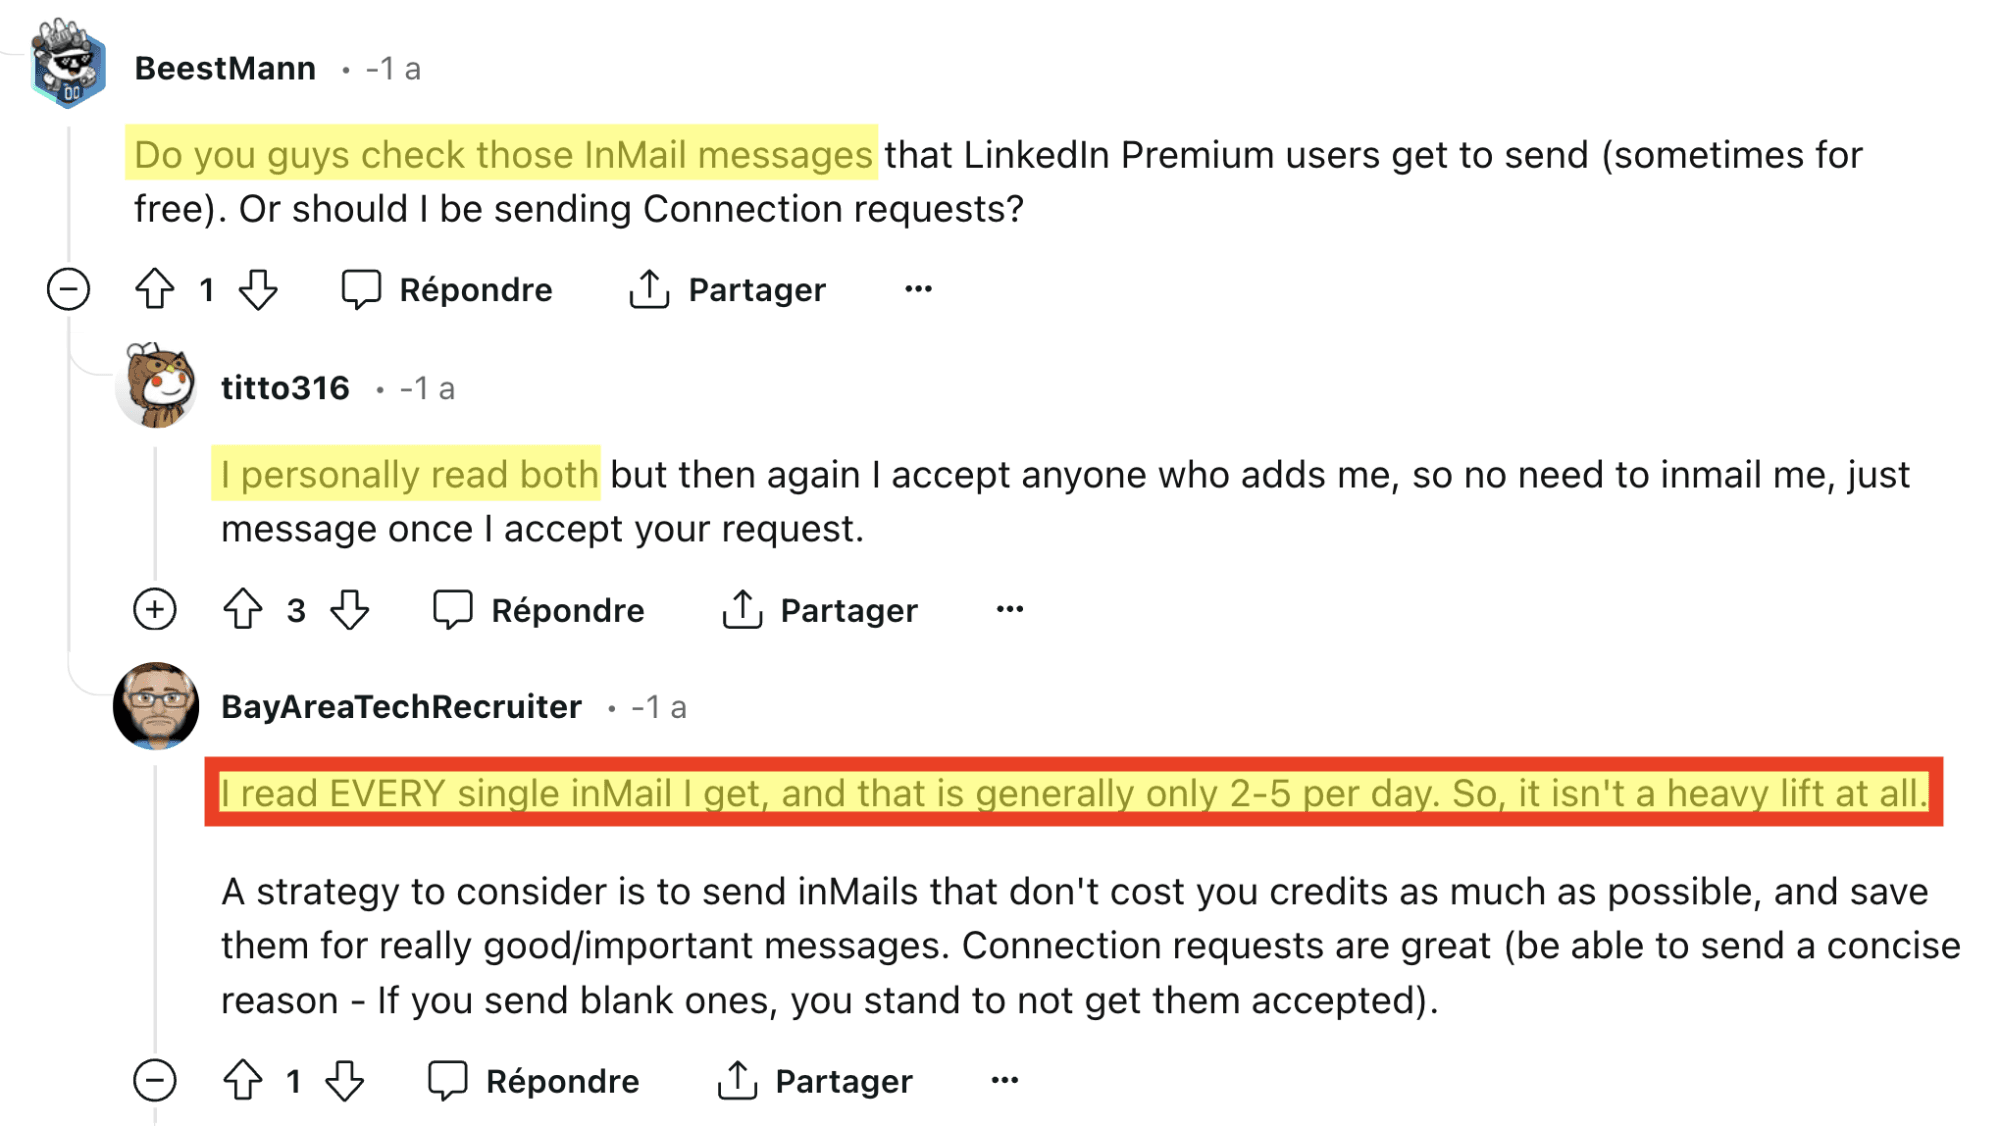 i read every single inmail quote reddit baytecharearecruiter - image1.png